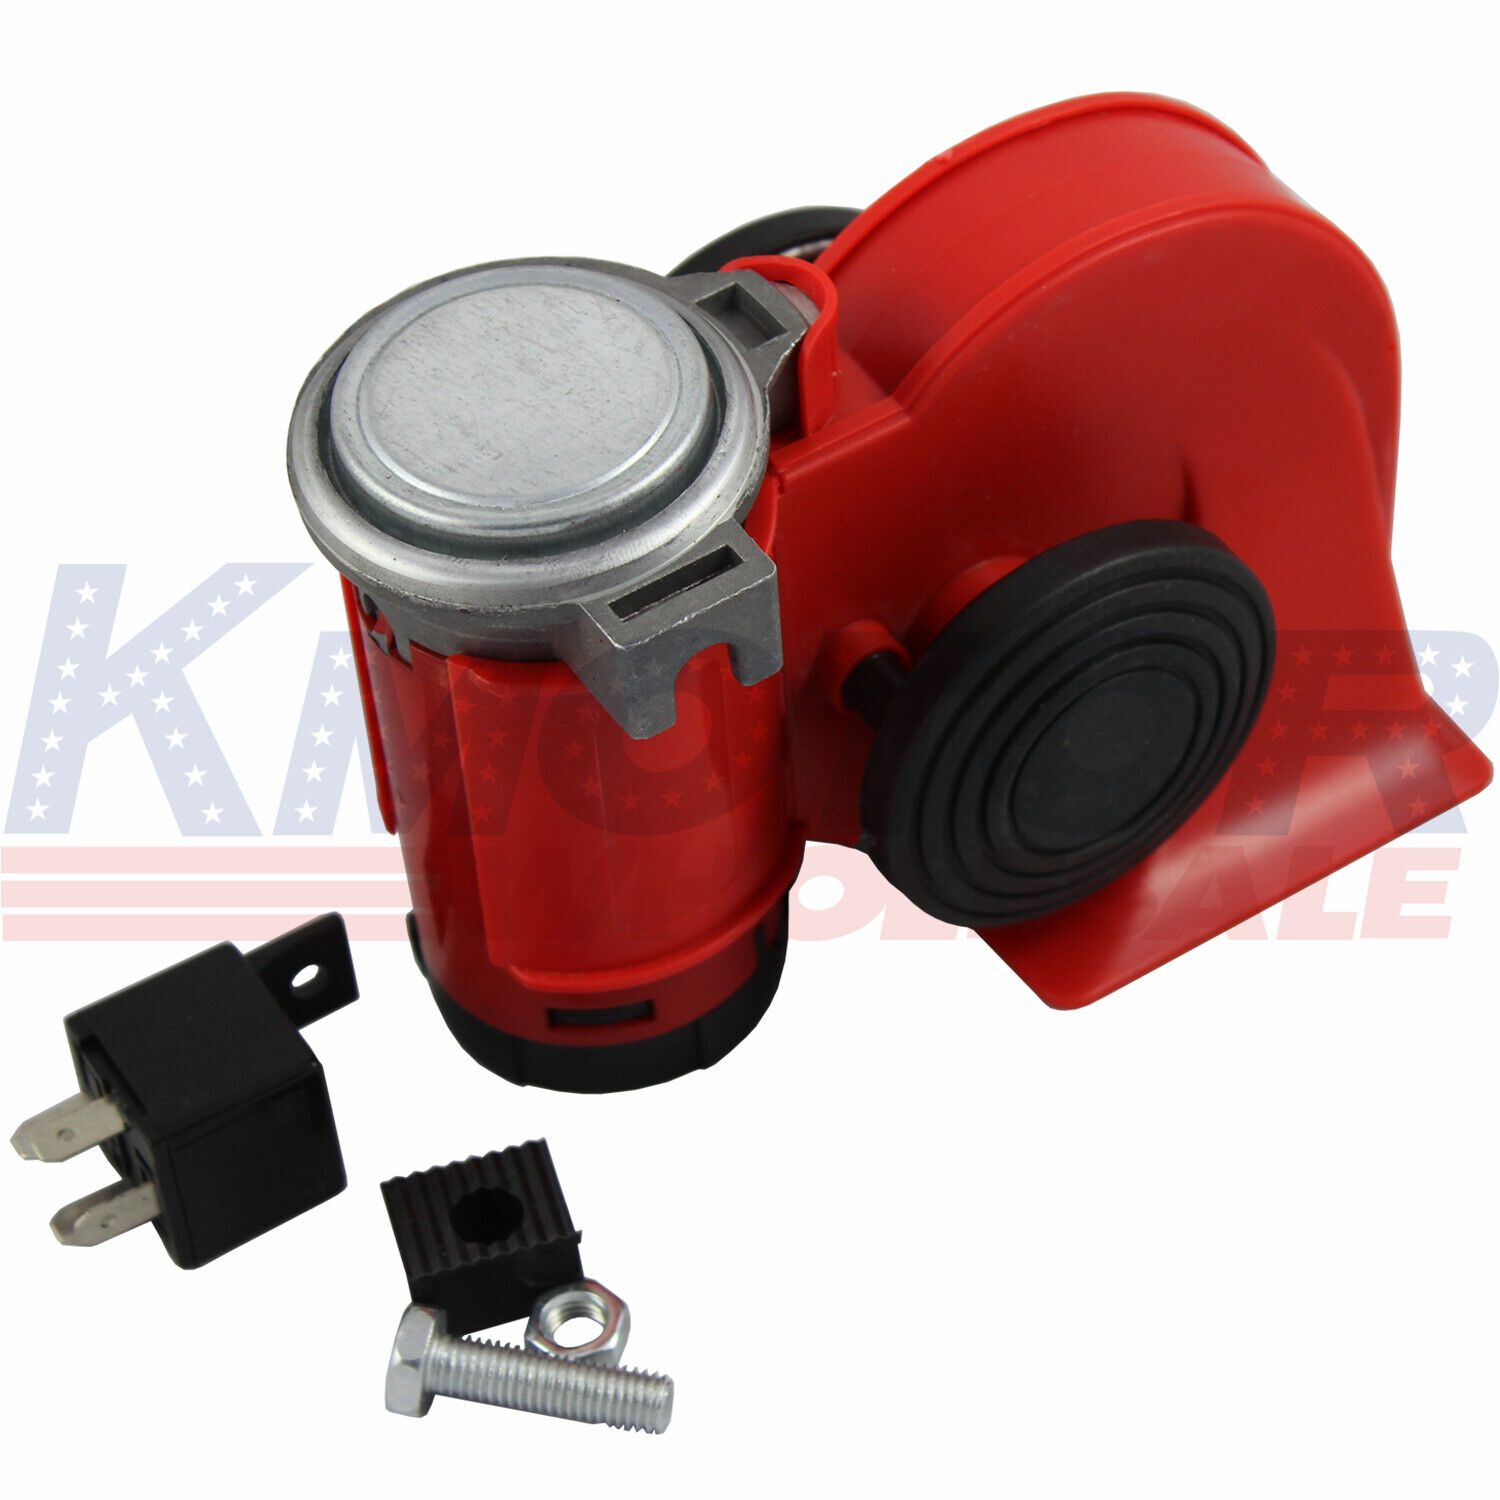 Universal Super Loud 12v Twin Auto Machine Air Horn Red 139dB For Motorcycle Car